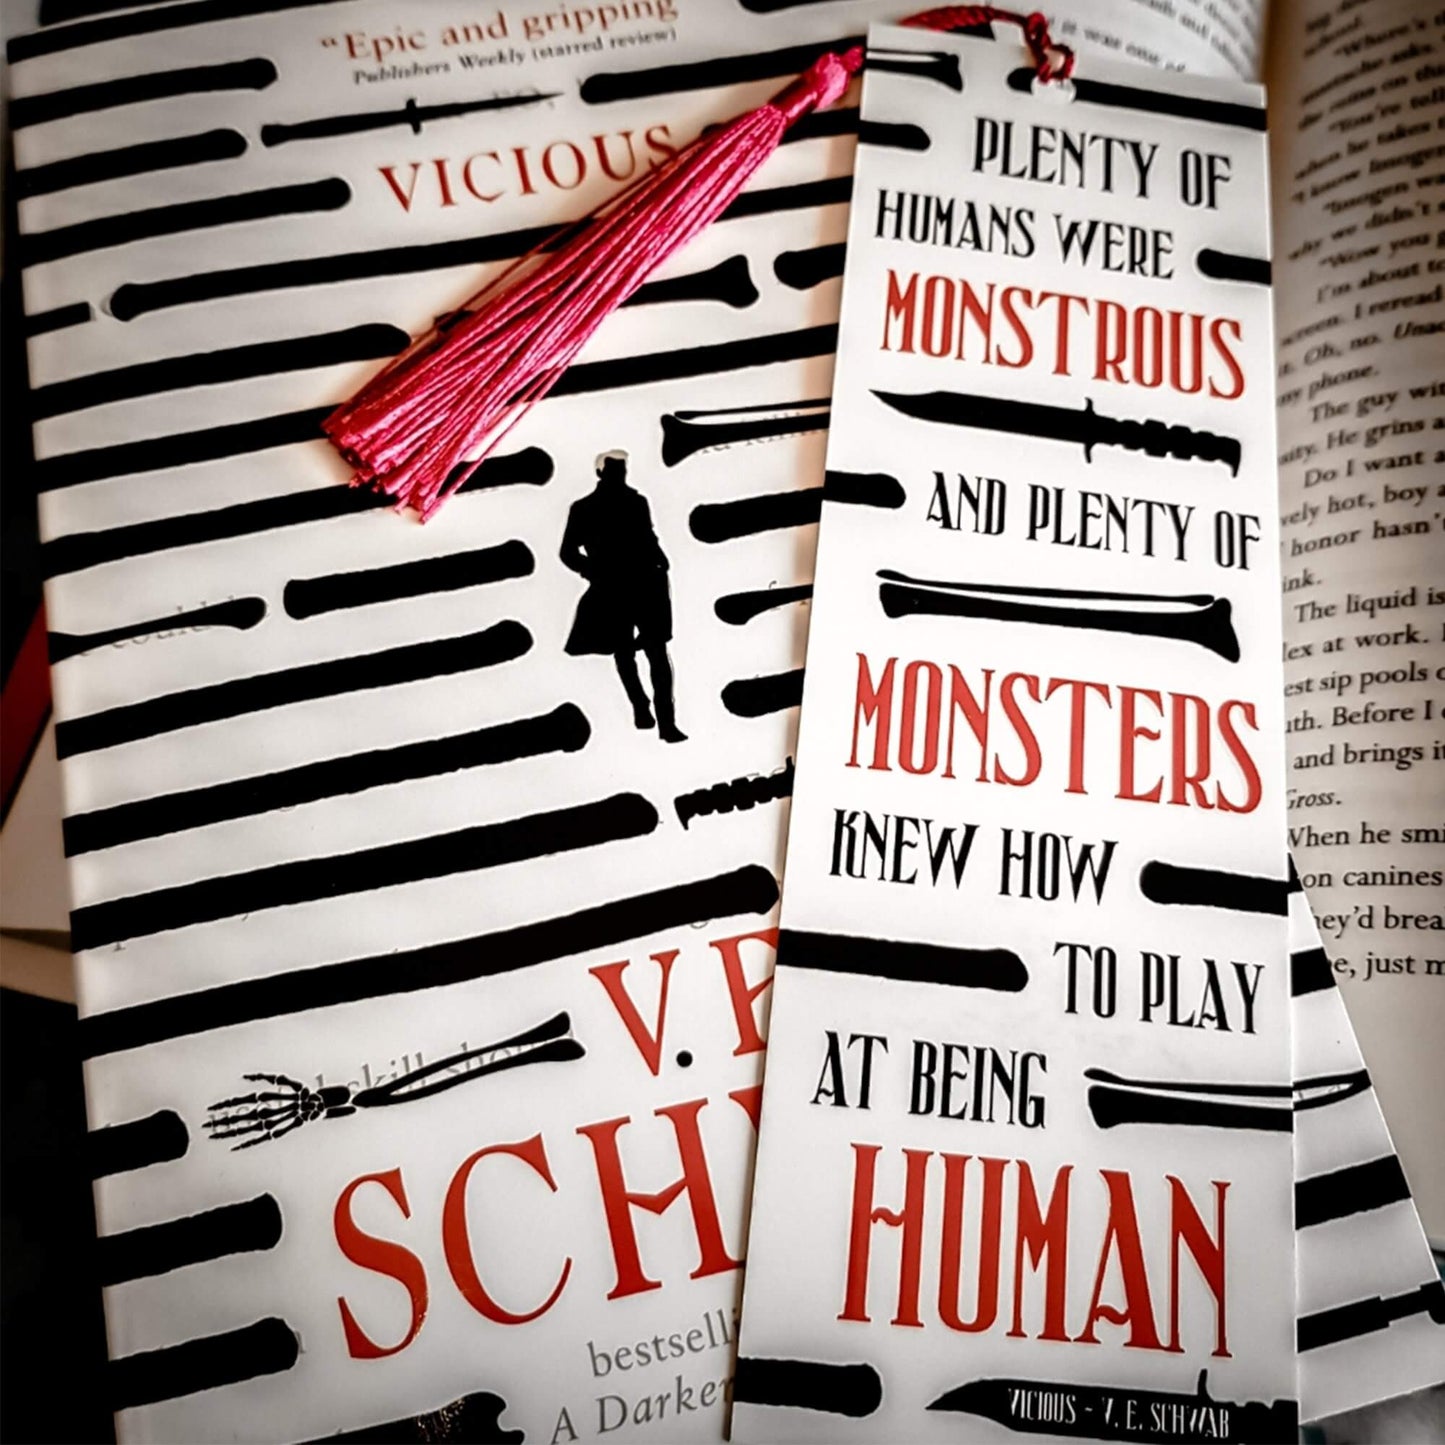 Plenty of Humans Were Monstrous. Vicious by V.E Schwab inspired bookmark with a red tassel. 